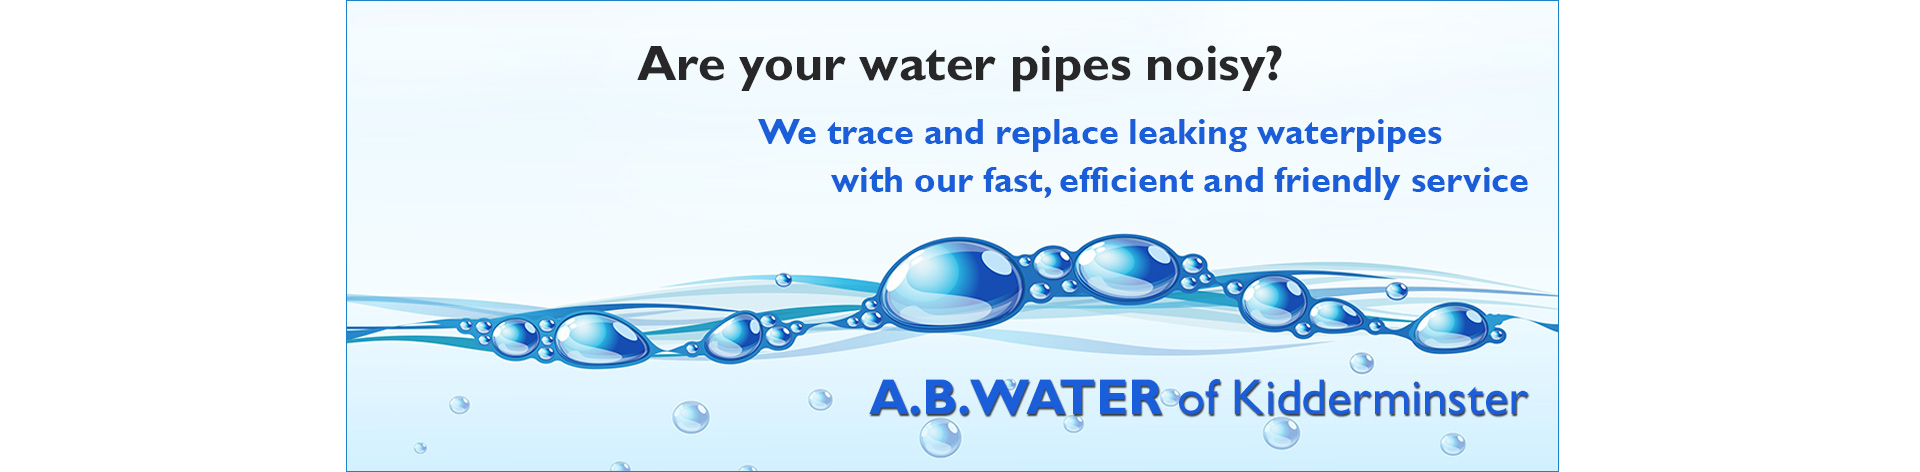 water-pipe-replacement-service-kidderminster